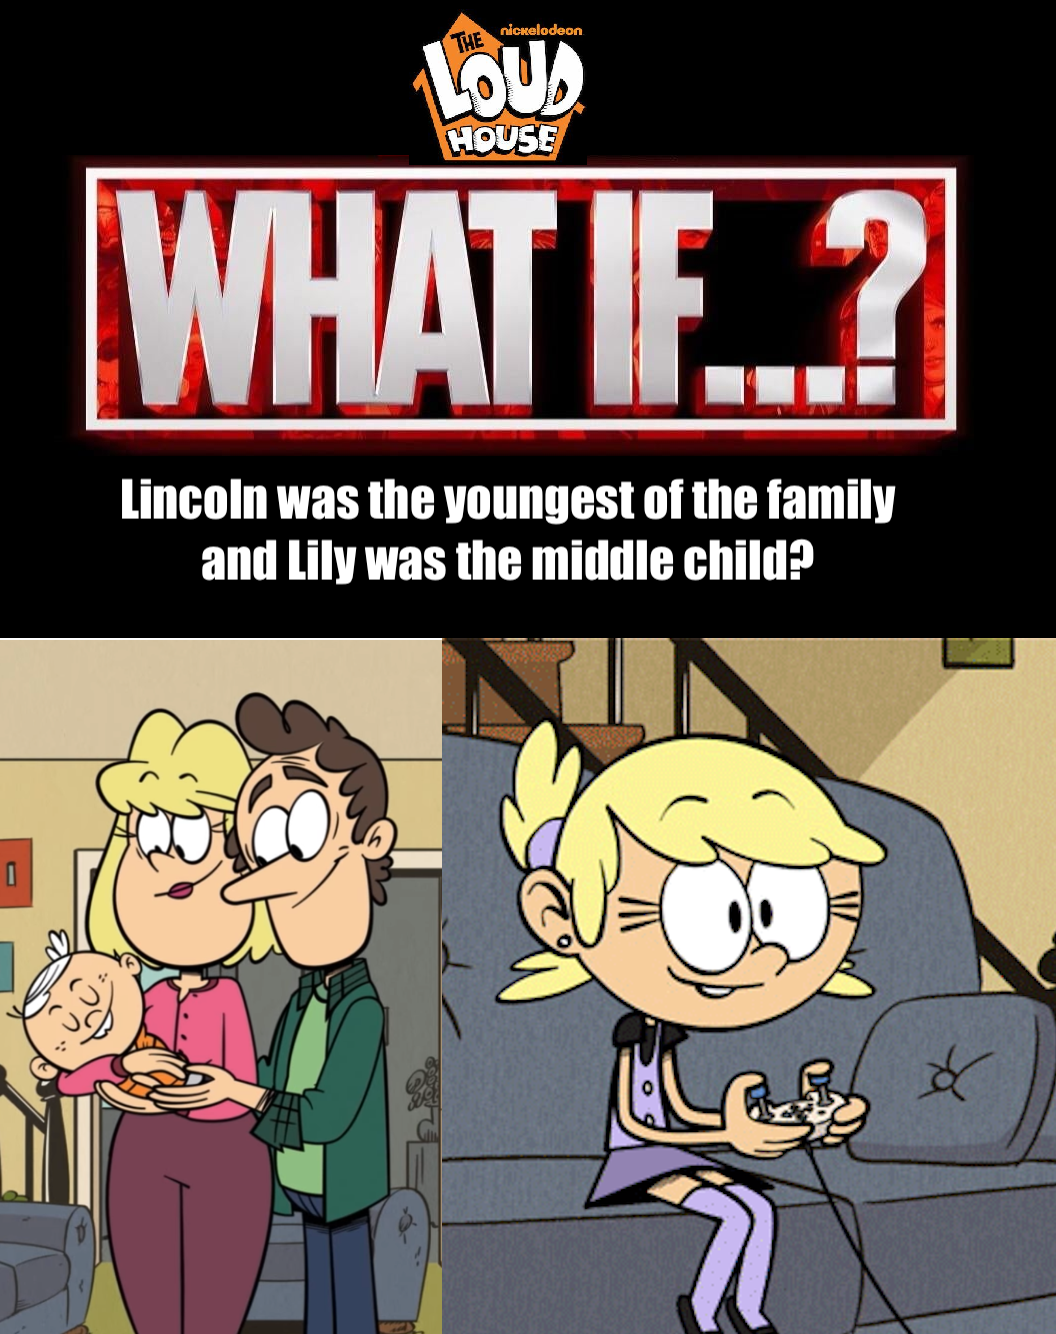 The Loud House: What If Lincoln and Lily switched? by Rack44 on DeviantArt